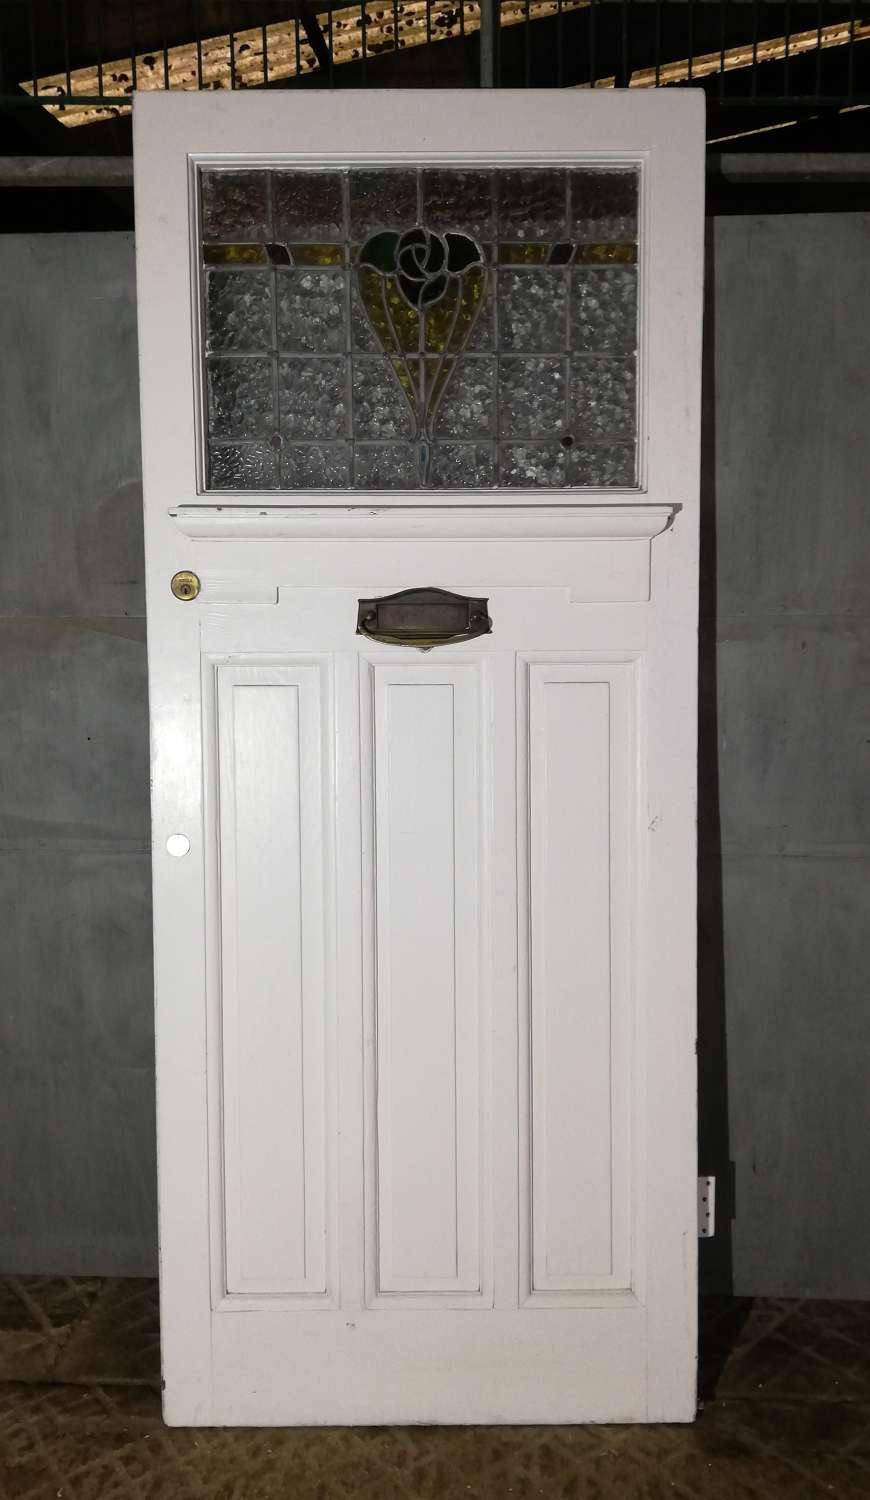 DE0827 EDWARDIAN FRONT DOOR WITH STAINED GLASS PANEL